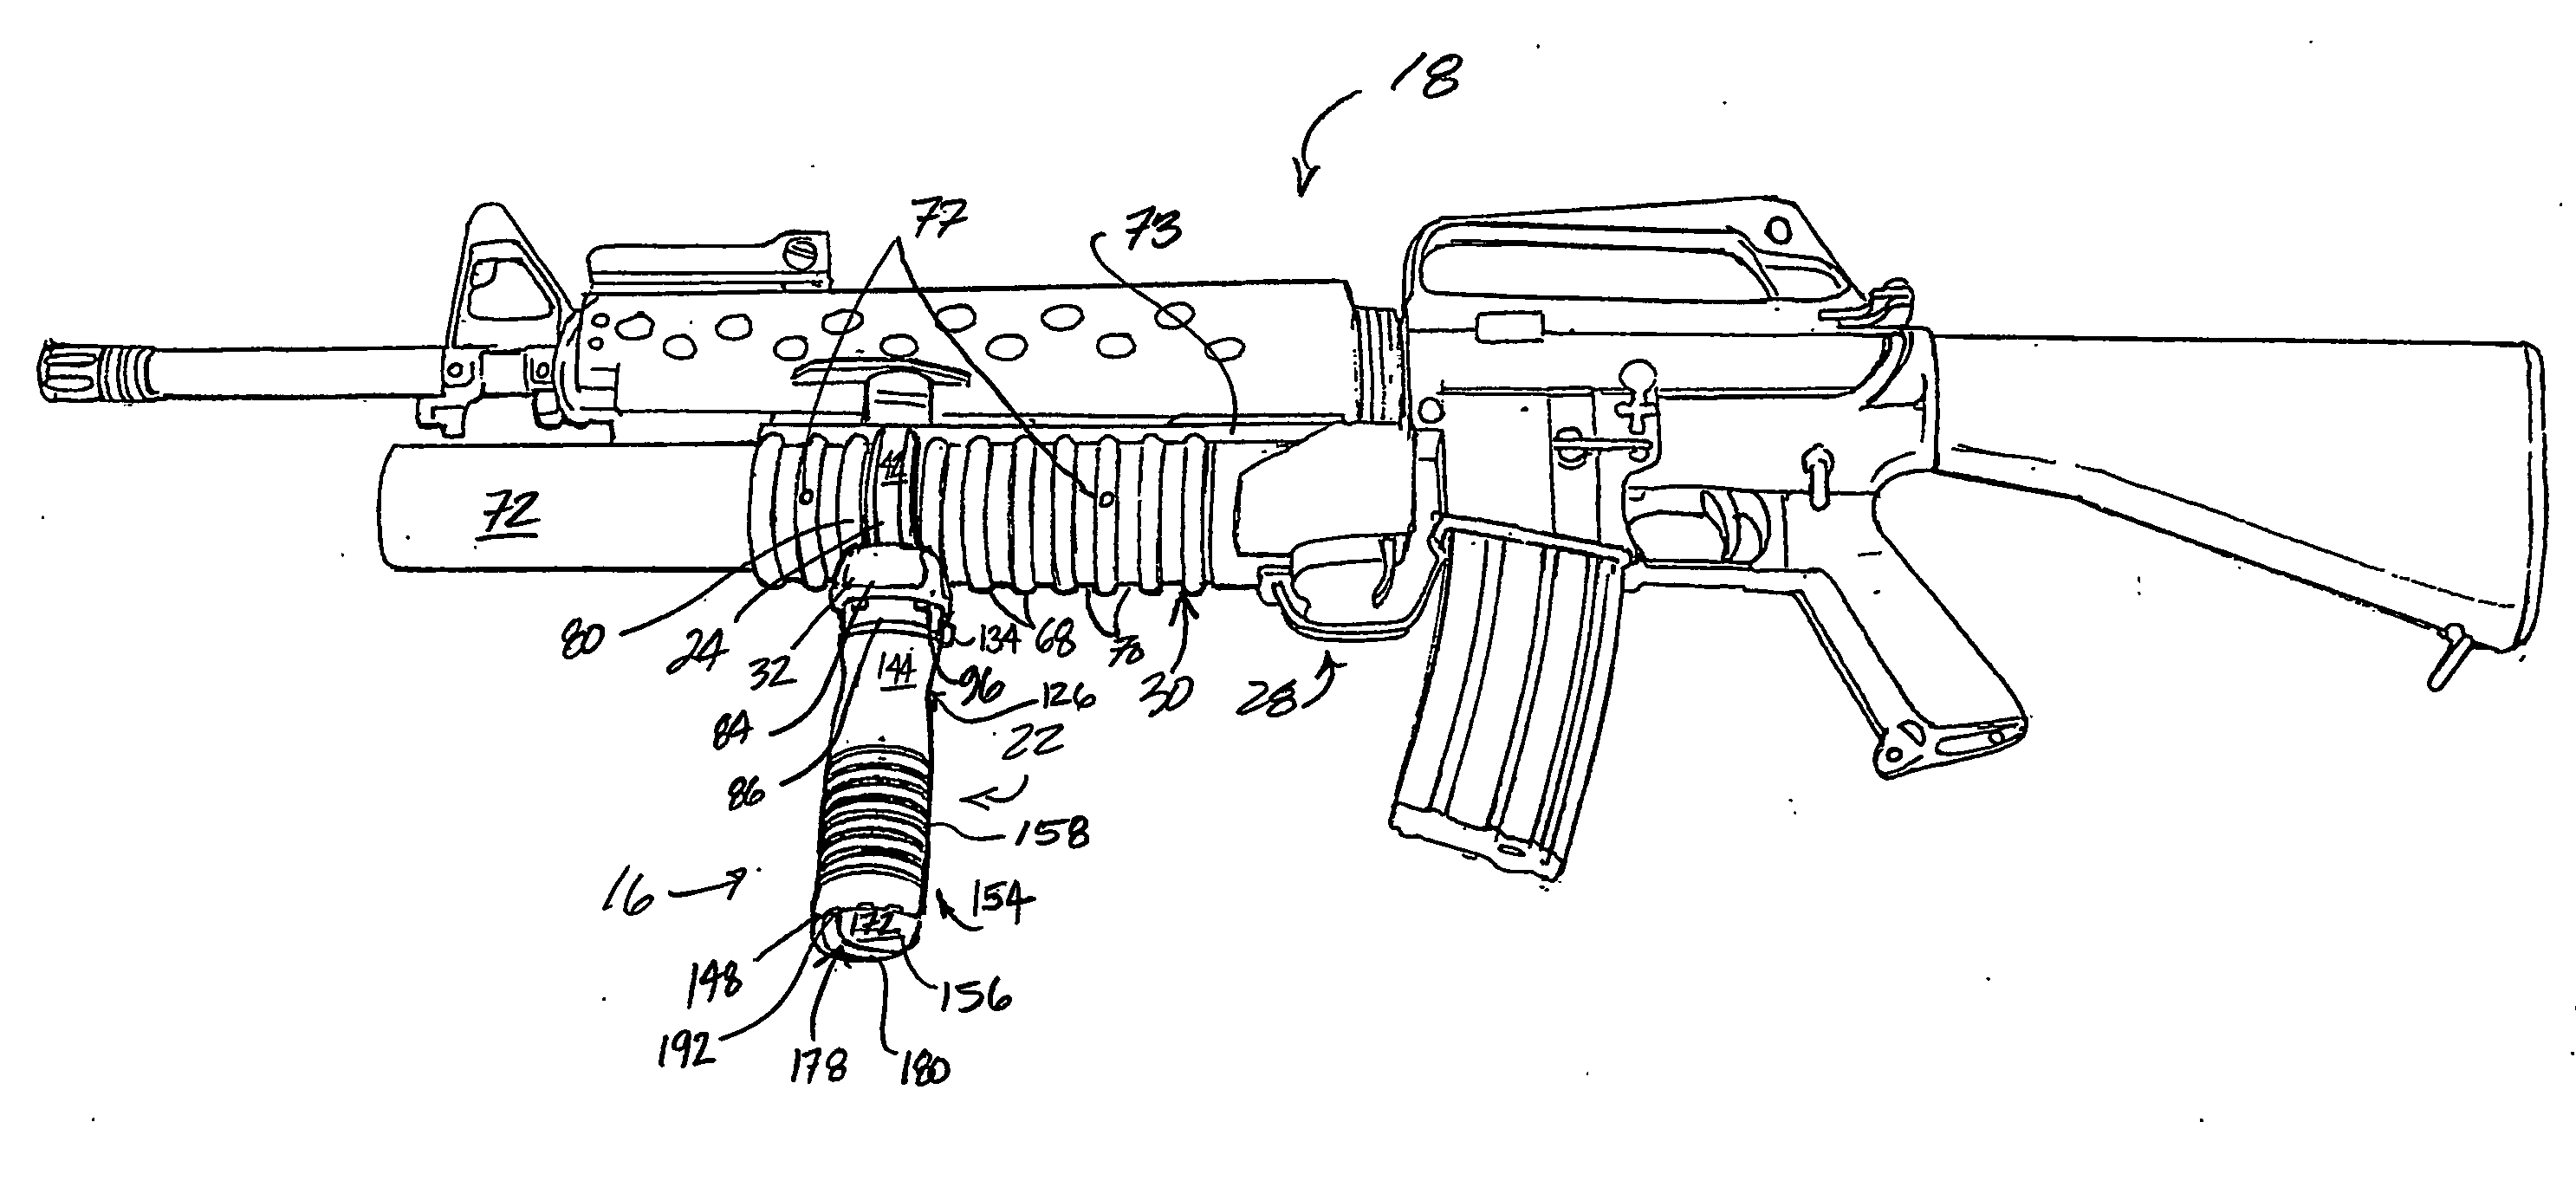 Weapon grip assembly